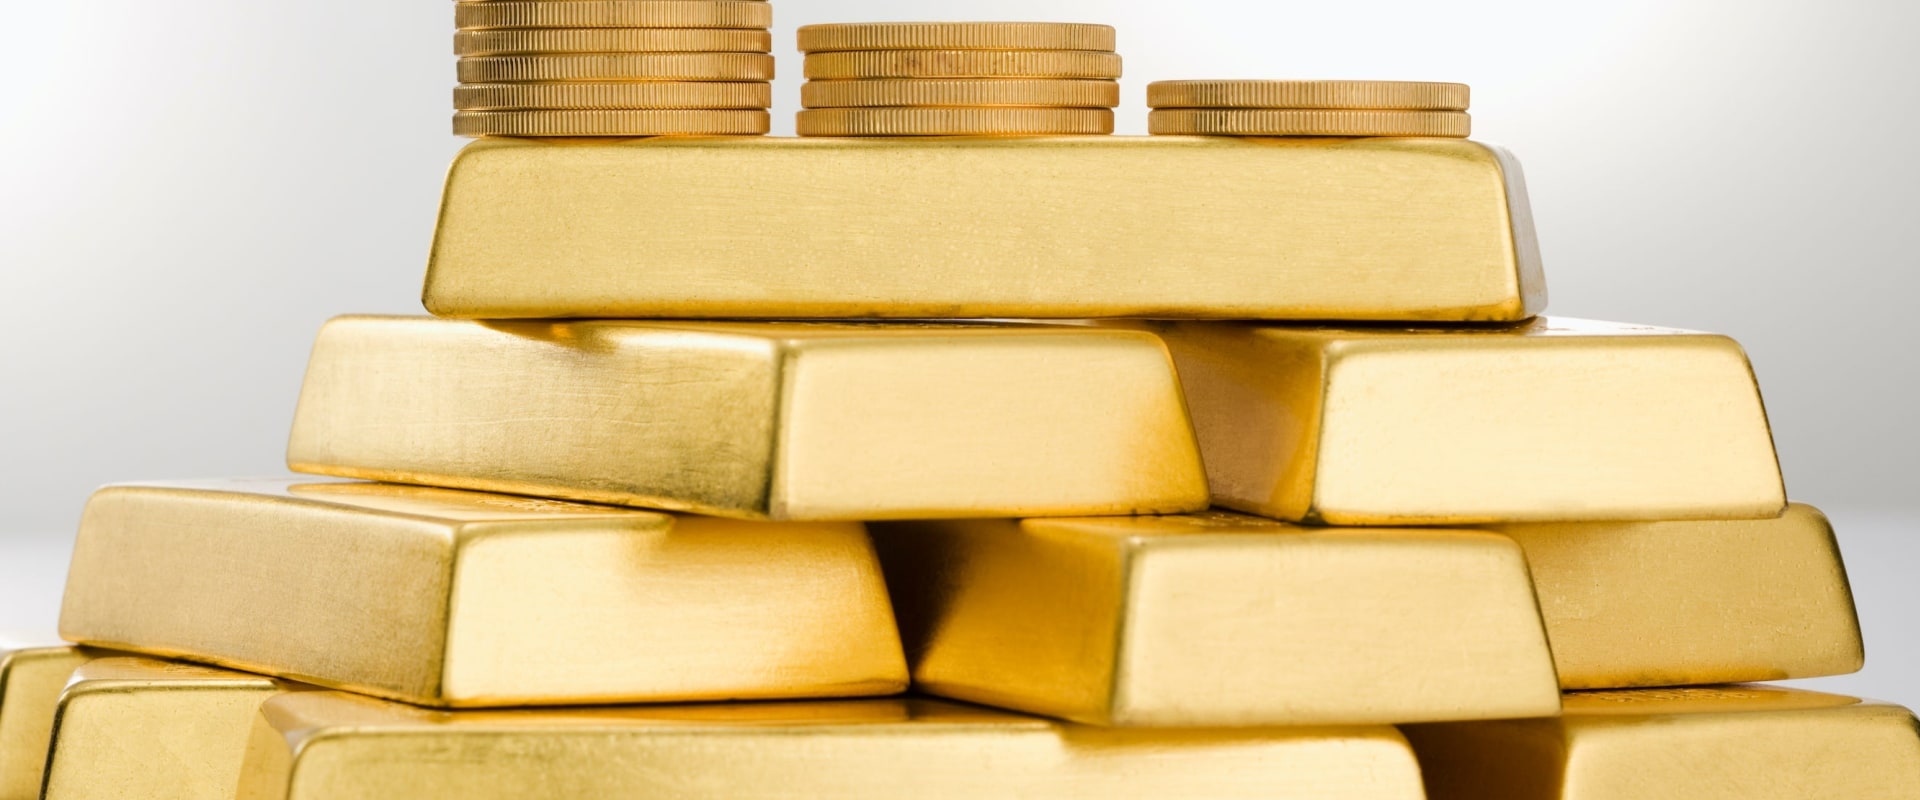 Are there any fees associated with buying and selling gold in an ira account?